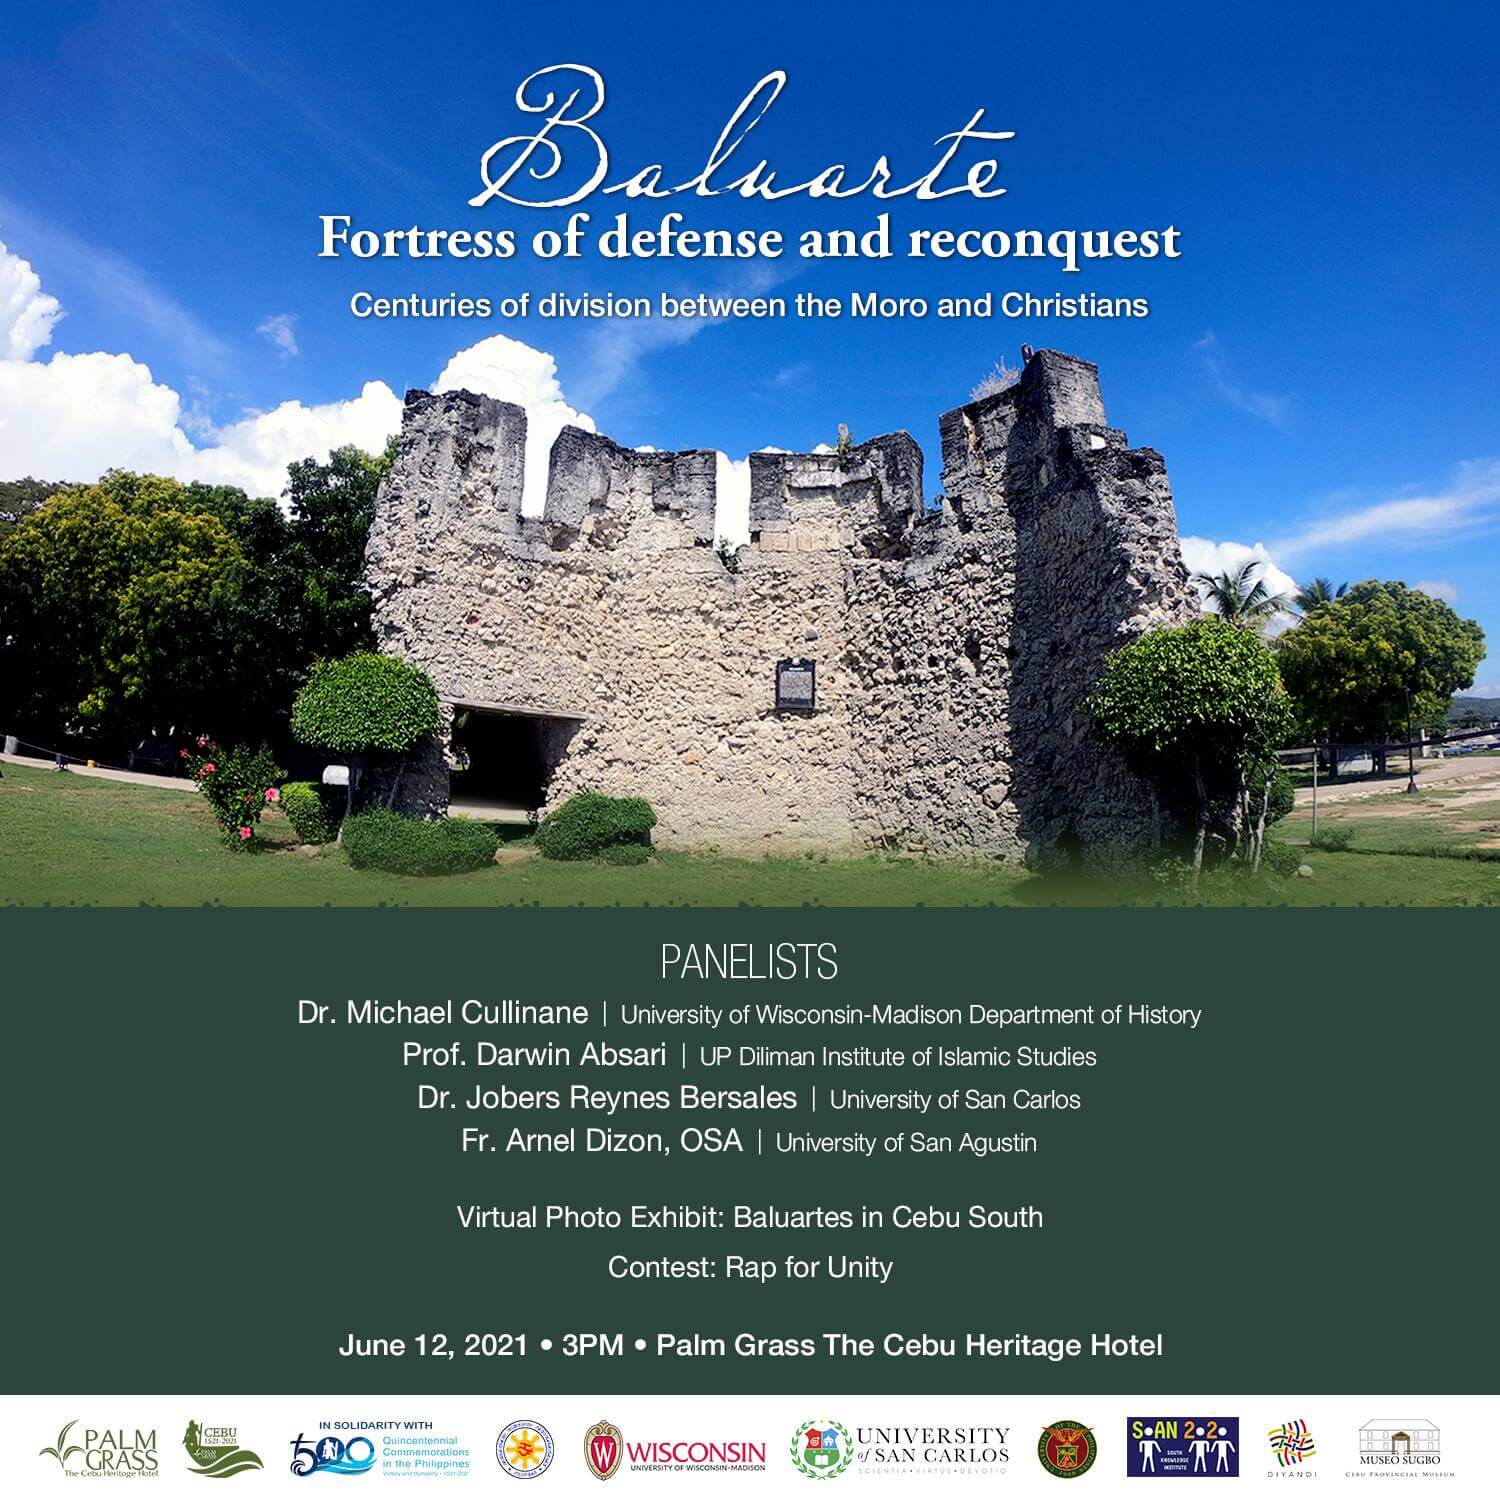 Forum on baluartes and rap contest to mark 123rd Philippine independence